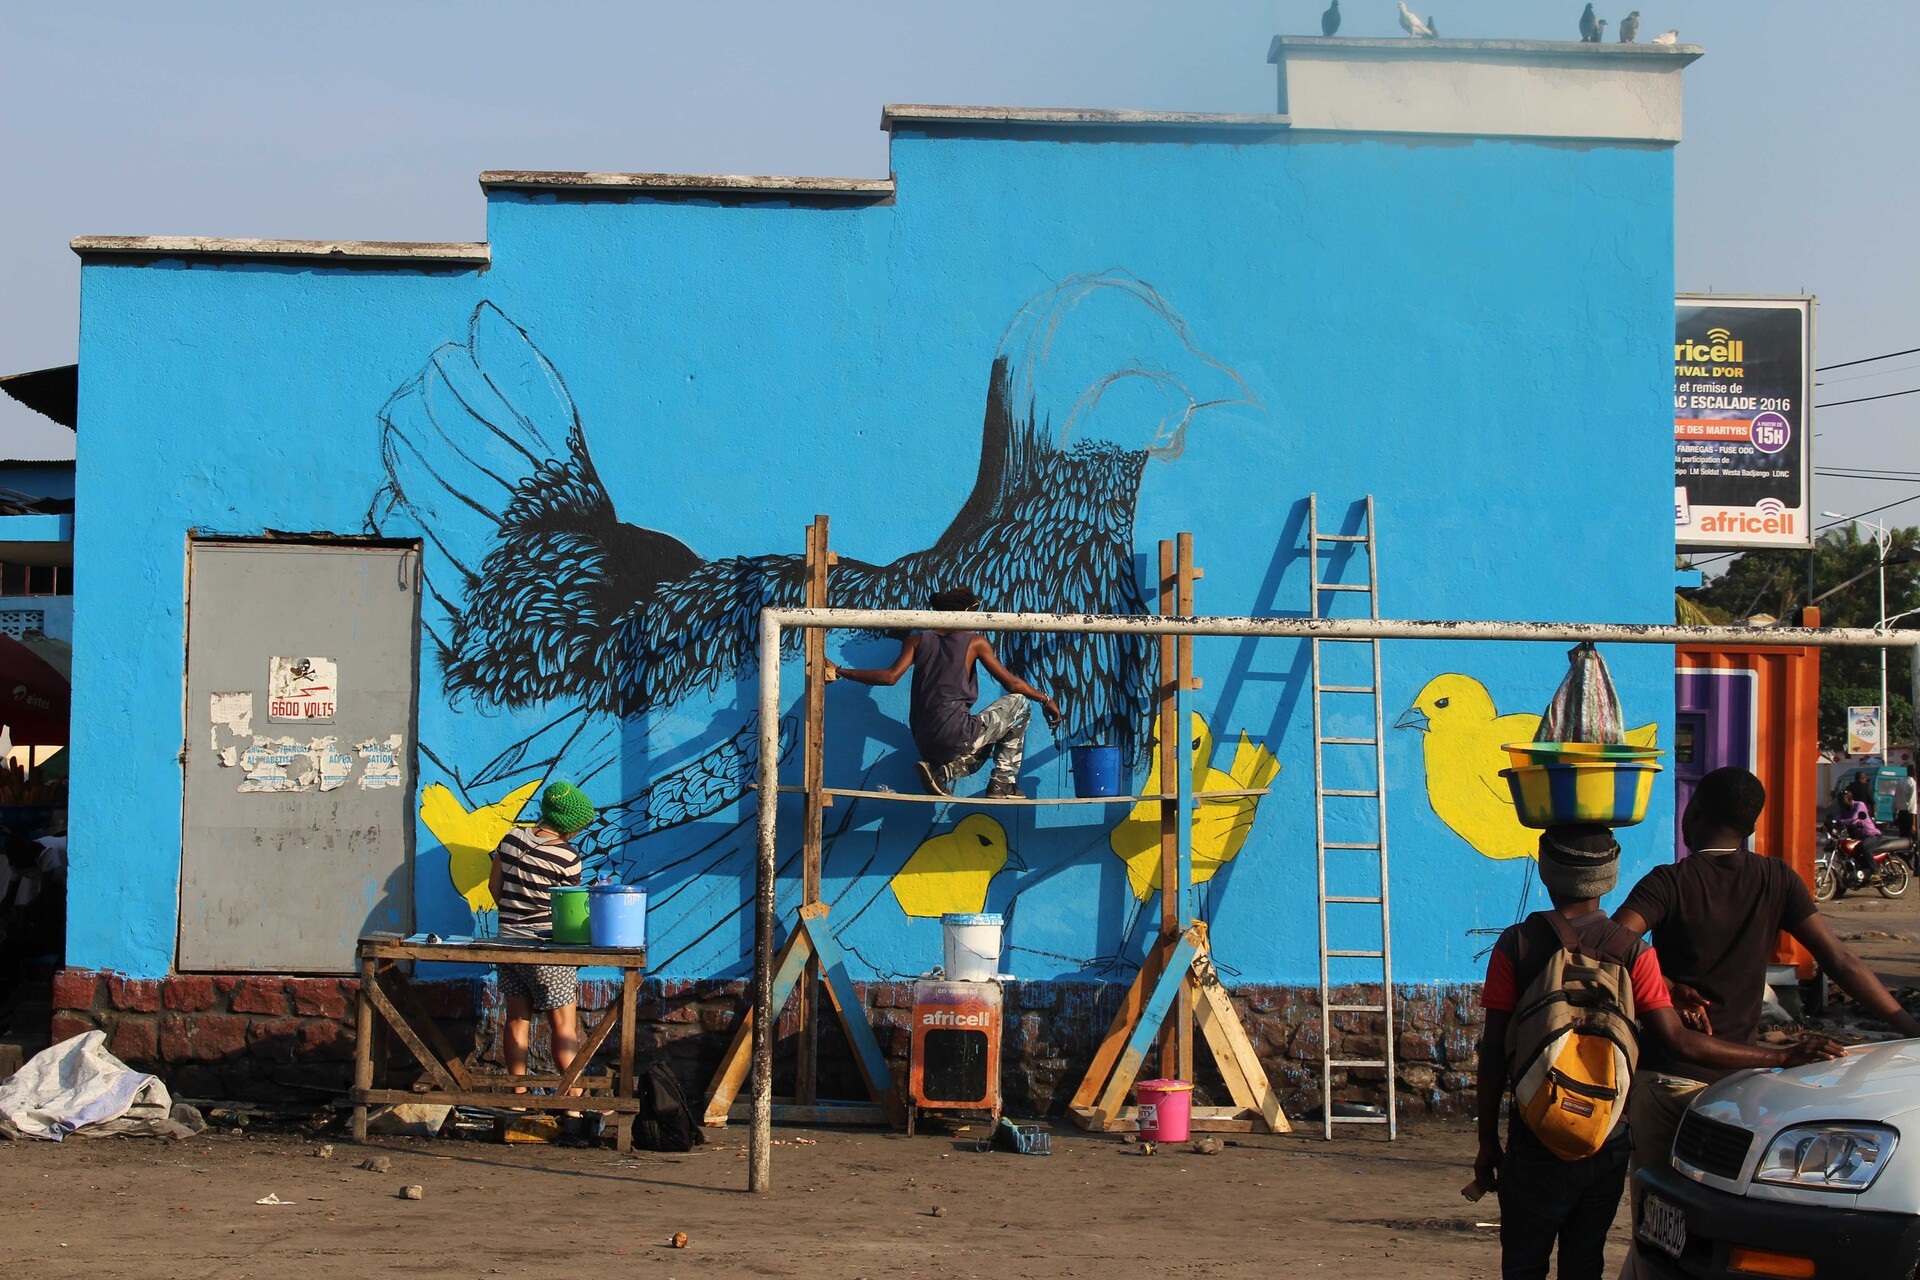 Batela Ngai, mural painting as part of the Urban Museum, collaboration between Oyo Project with Moise Mulumba, Lingwala, Kinshasa 2016. Photo by Moise Mulumba.